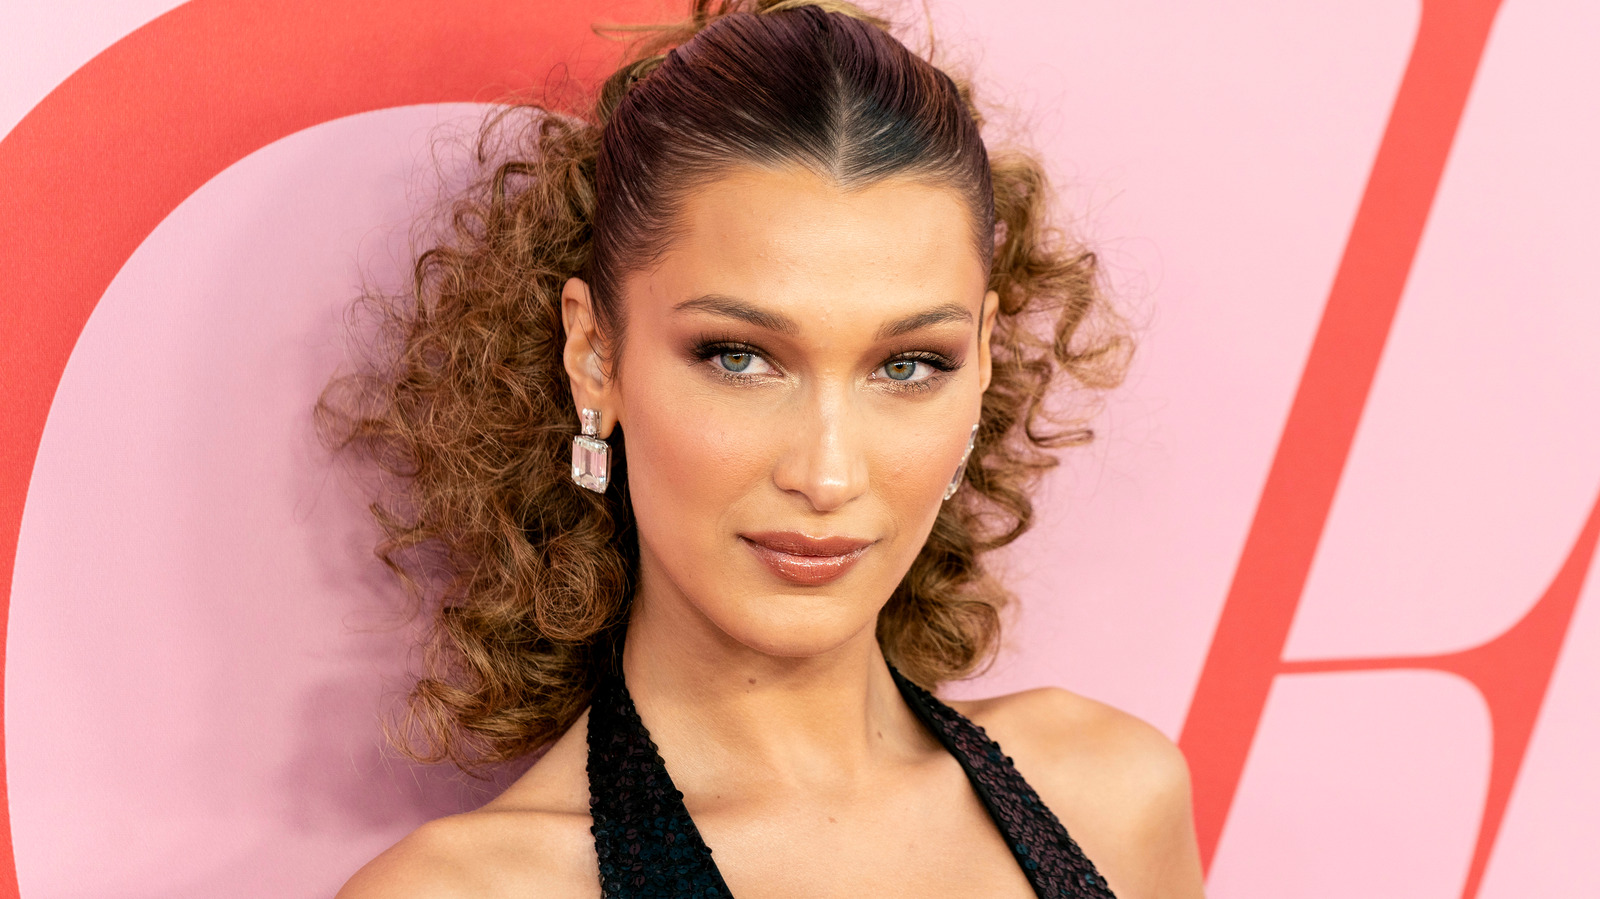 What Bella Hadid Has Said About Her Lyme Disease Diagnosis